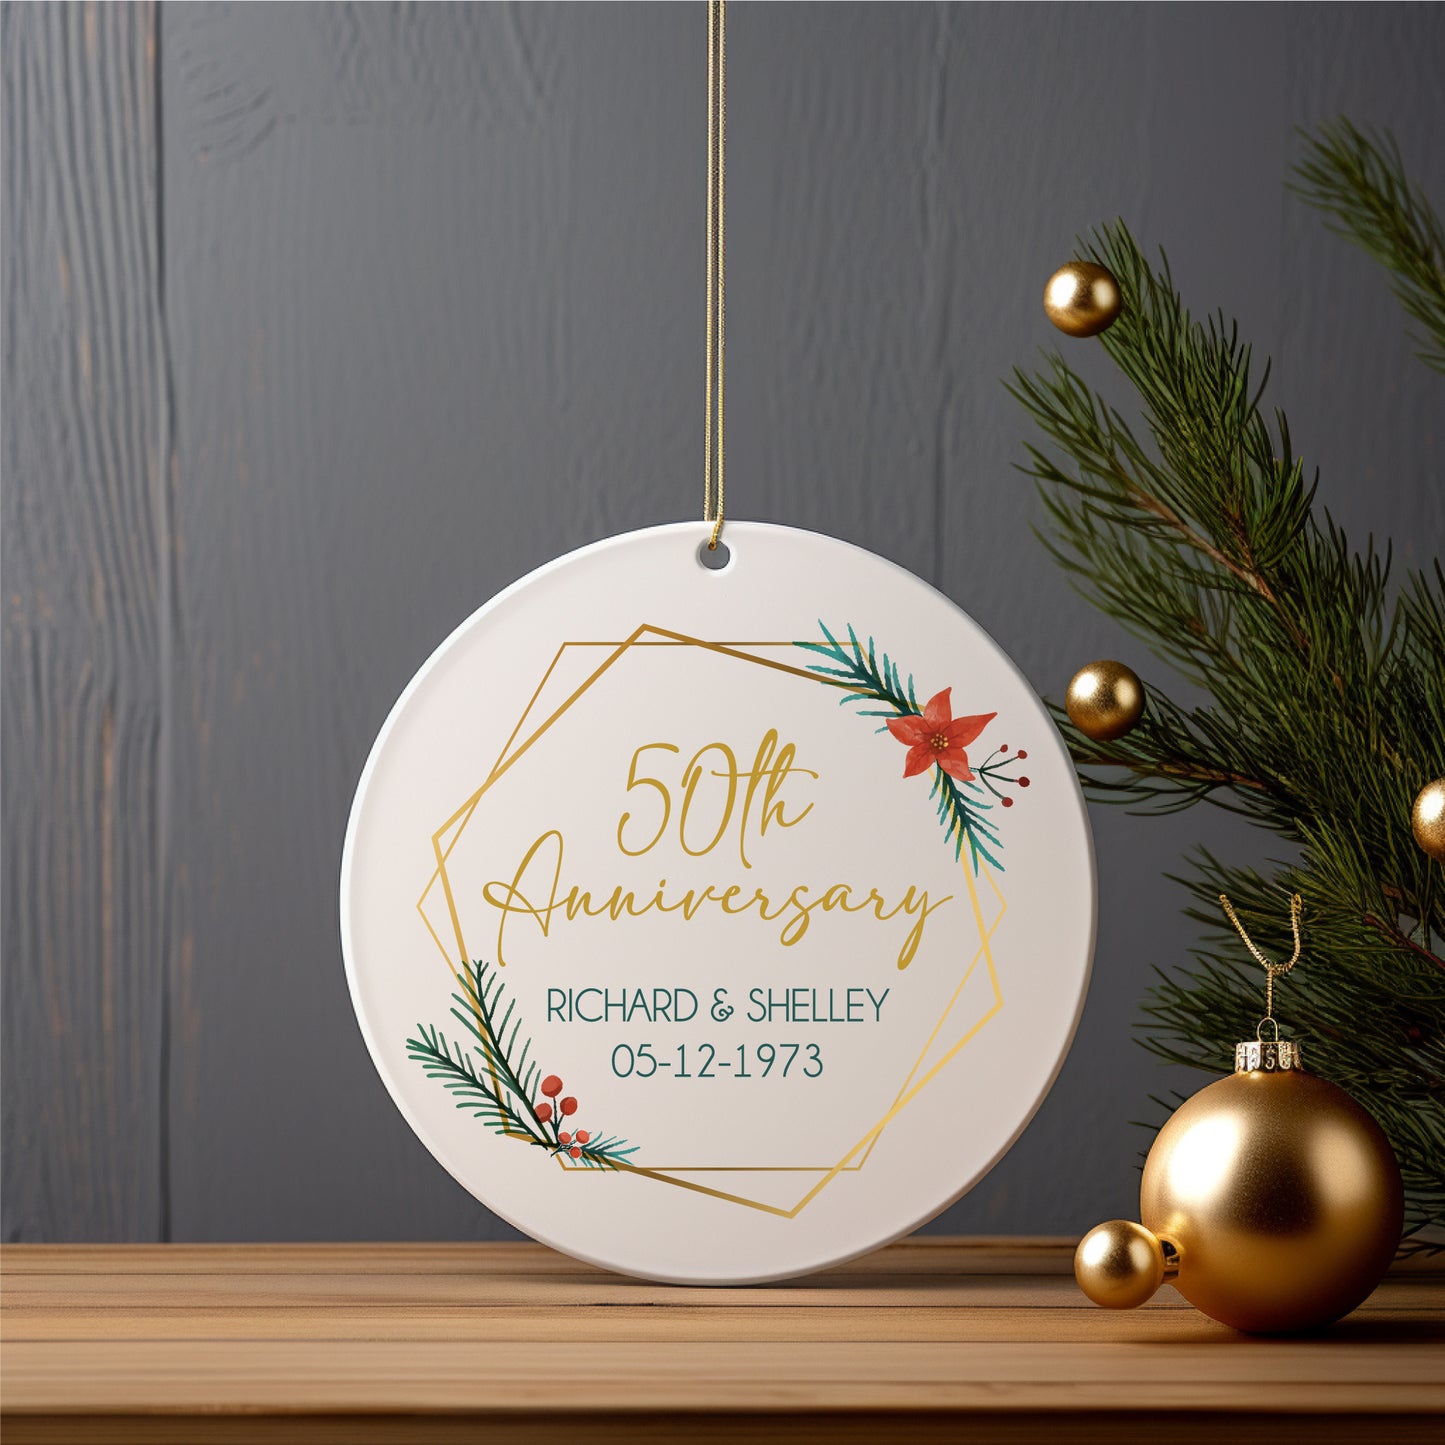 Personalized 50th Wedding Anniversary Gift - Keepsake Ornament for Golden Anniversary